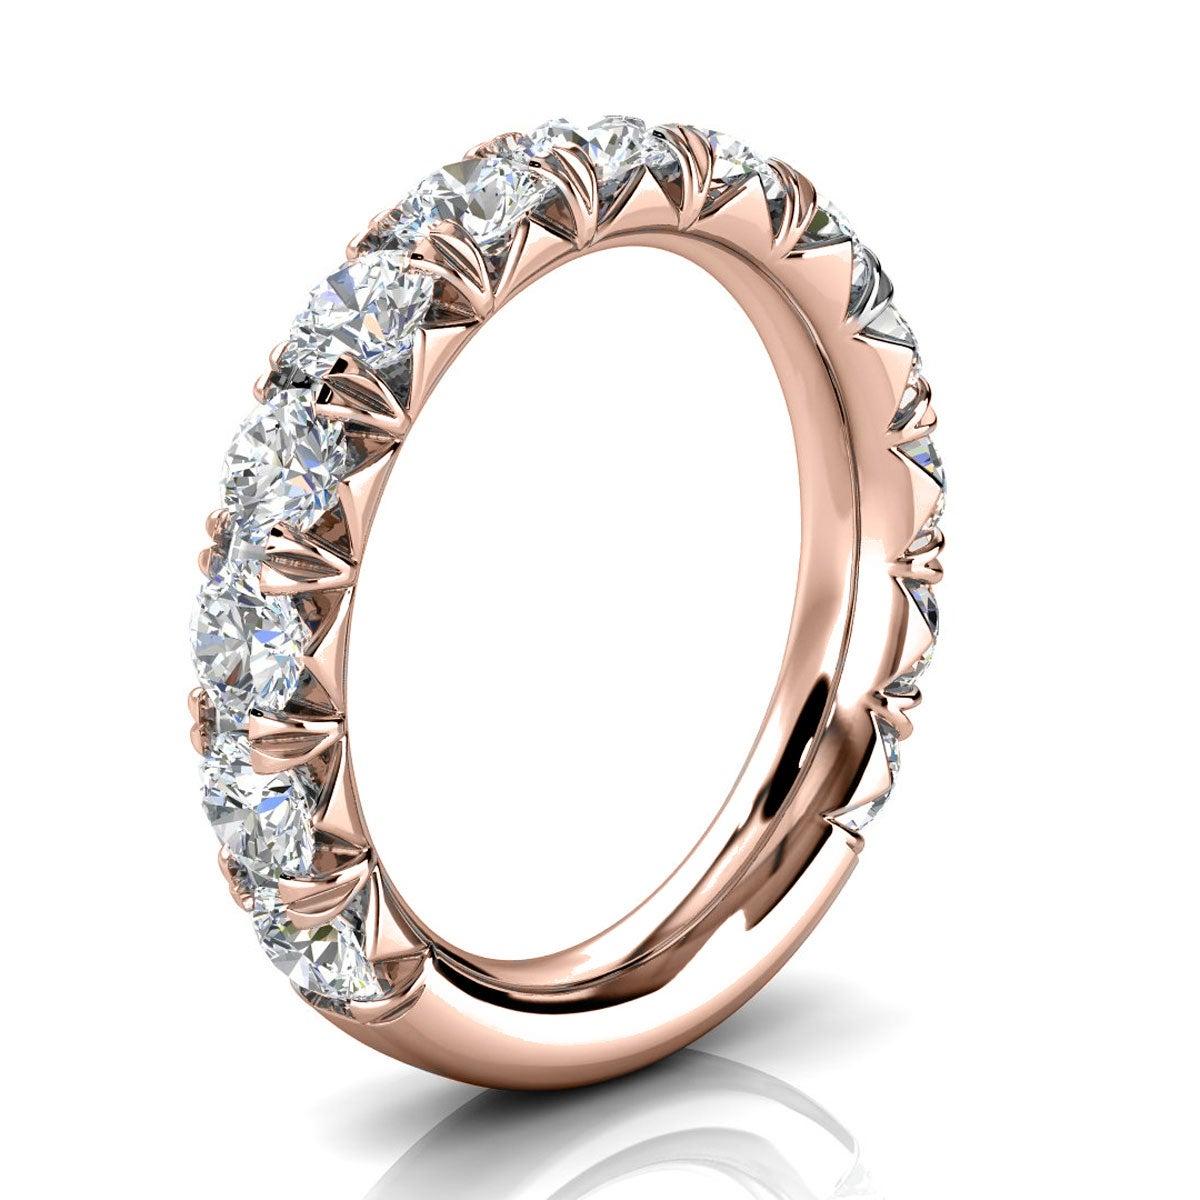 For Sale:  14k Rose Gold GIA French Pave Diamond Ring '2 Ct. tw' 2